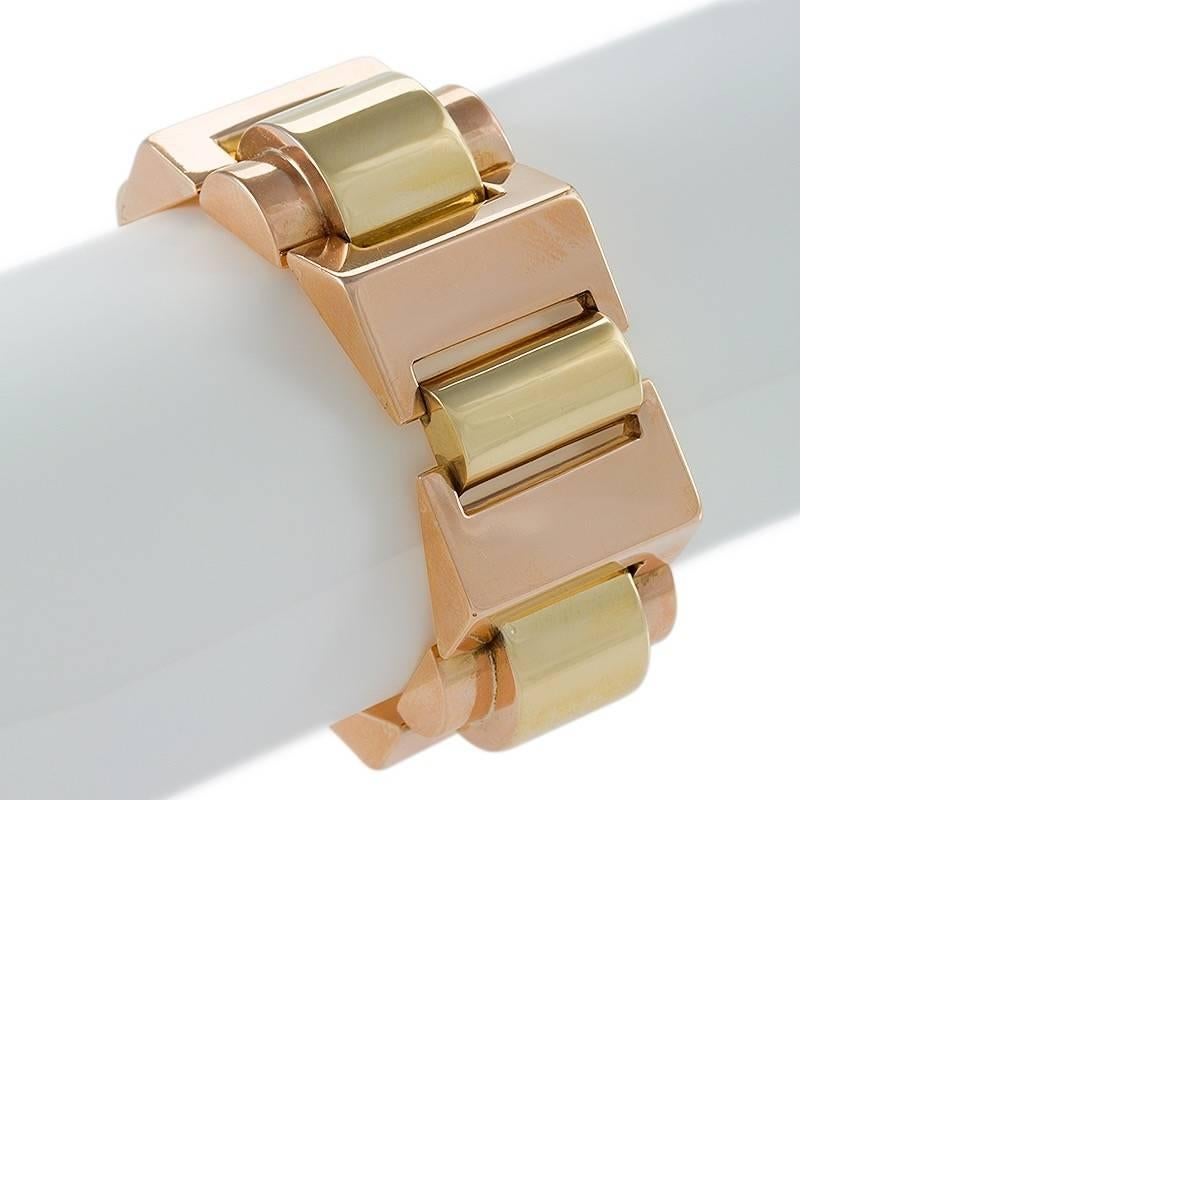 A European Retro 18 karat polished gold bracelet. The heavy link bracelet is composed of 6 triangular and 6 oval links in alternating pink and yellow polished gold.  Circa 1940's.

Following World War II, jewelry makers in Europe and America made